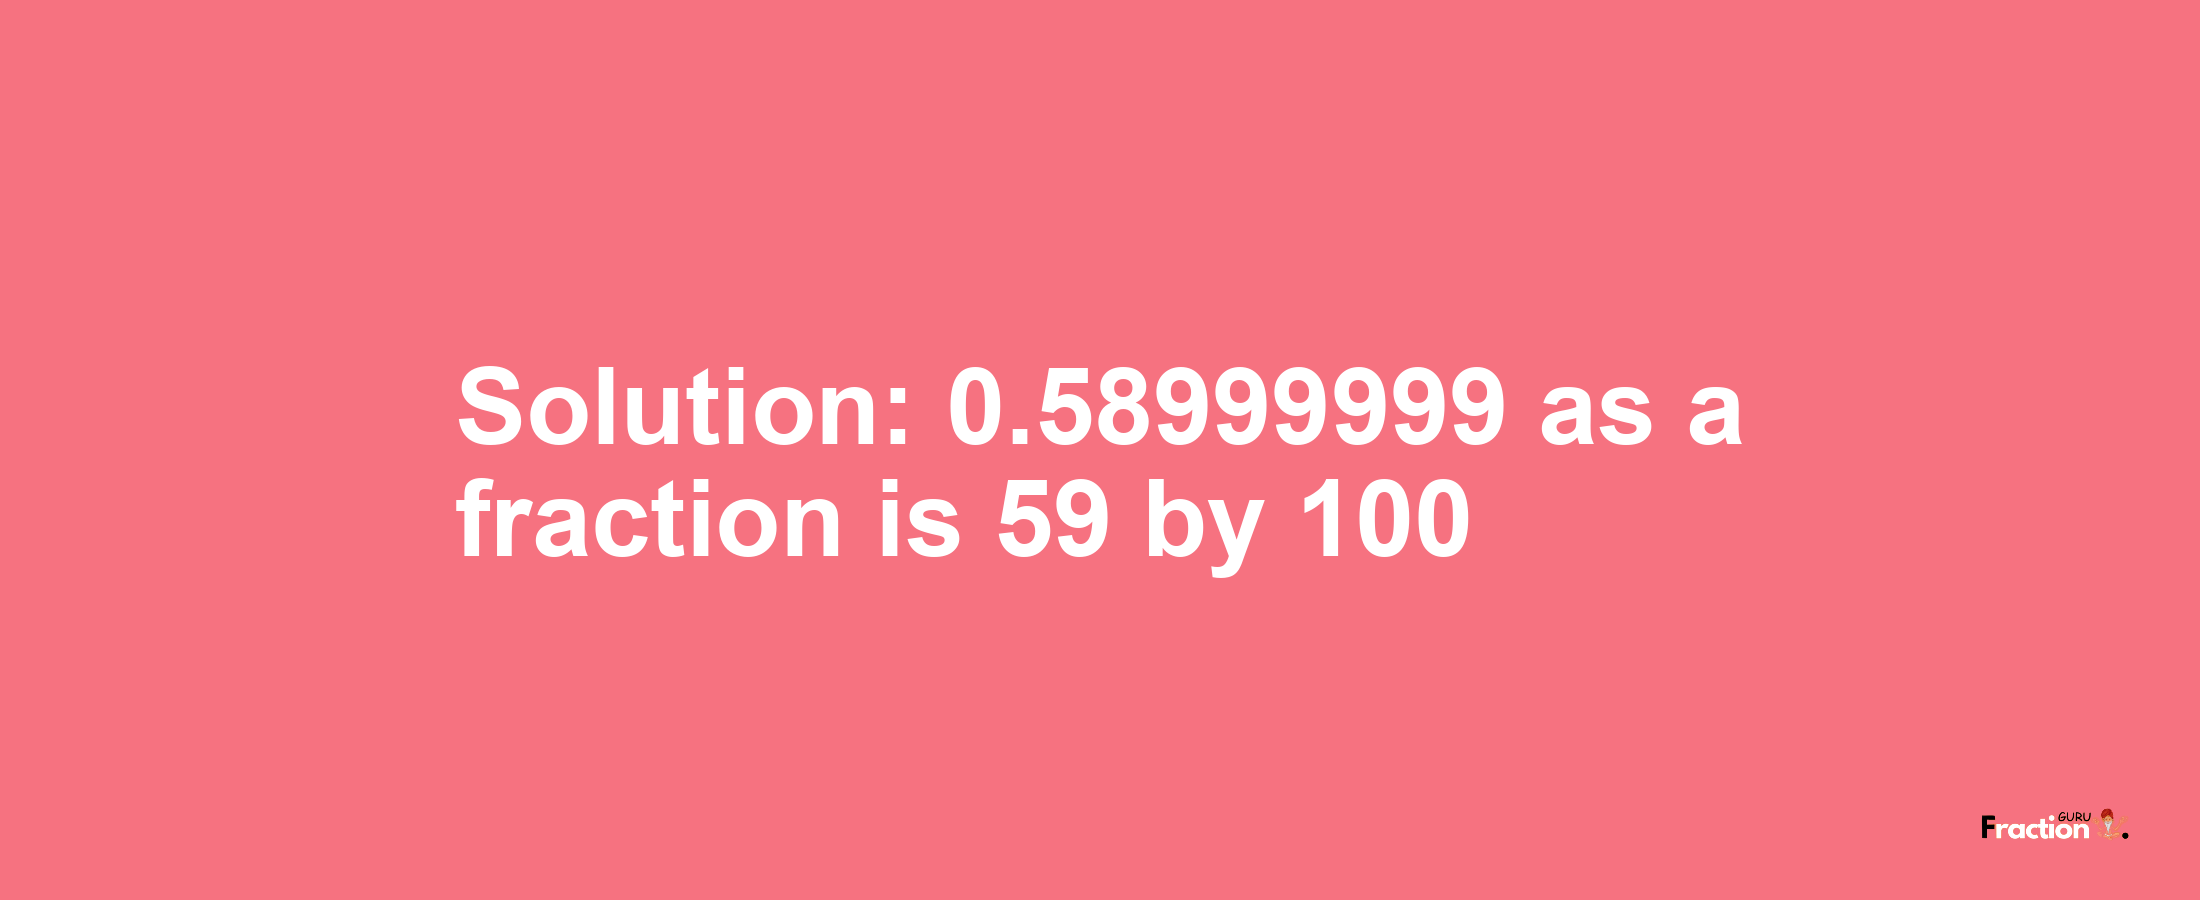 Solution:0.58999999 as a fraction is 59/100